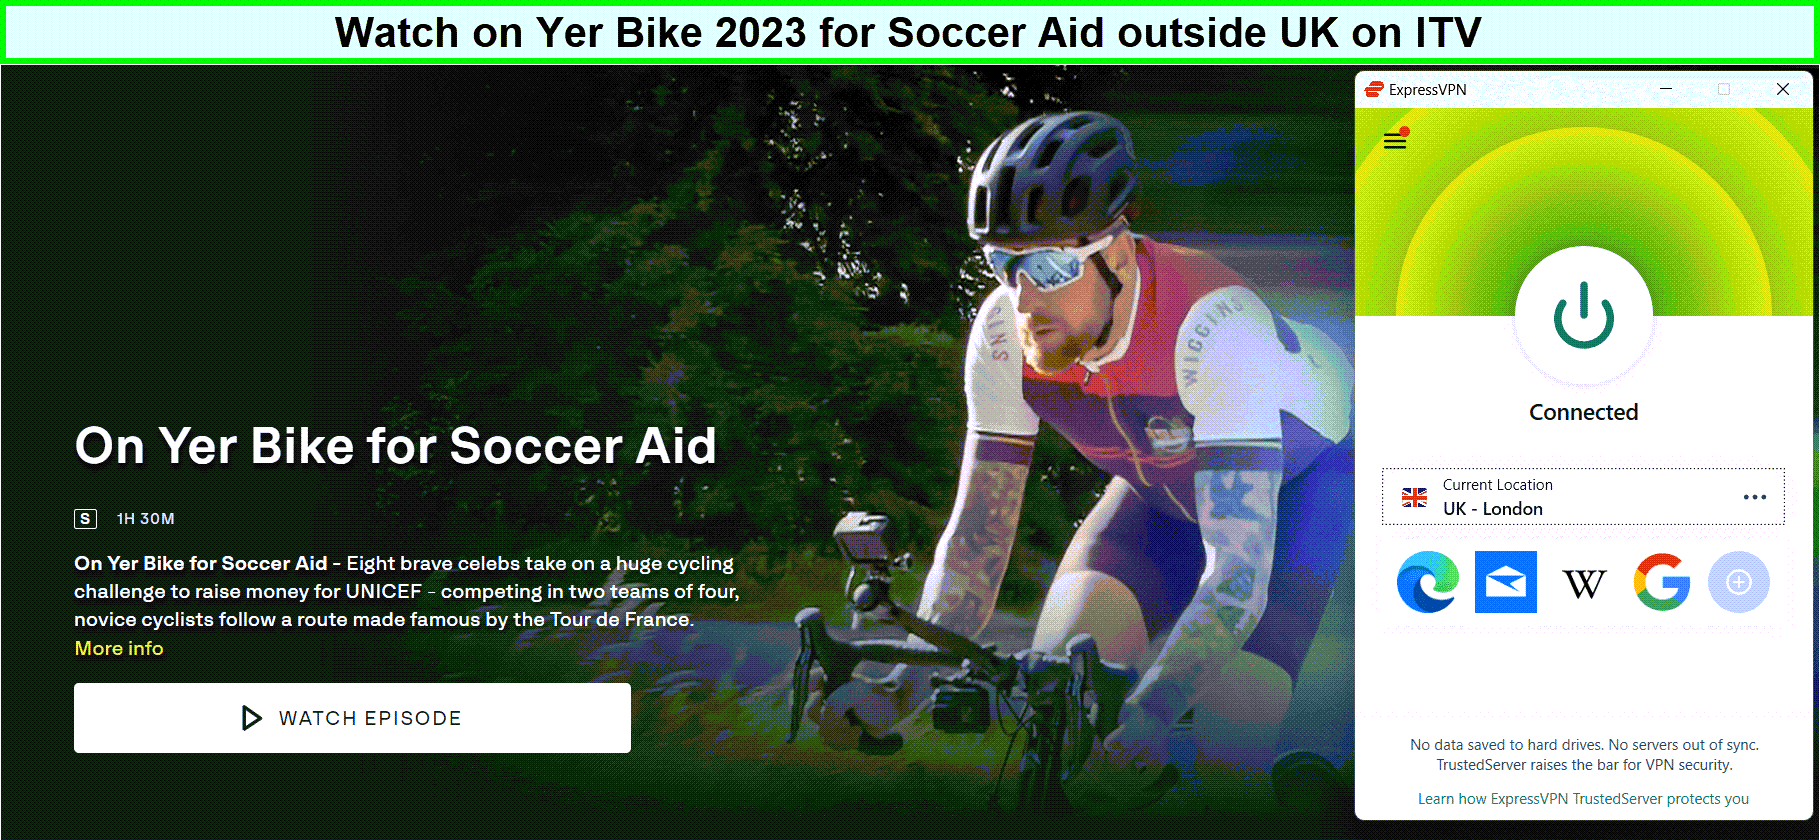 Watch-On-Yer-Bike-2023-for-Soccer-Aid-in-USA-on-ITV-with-ExpressVPN